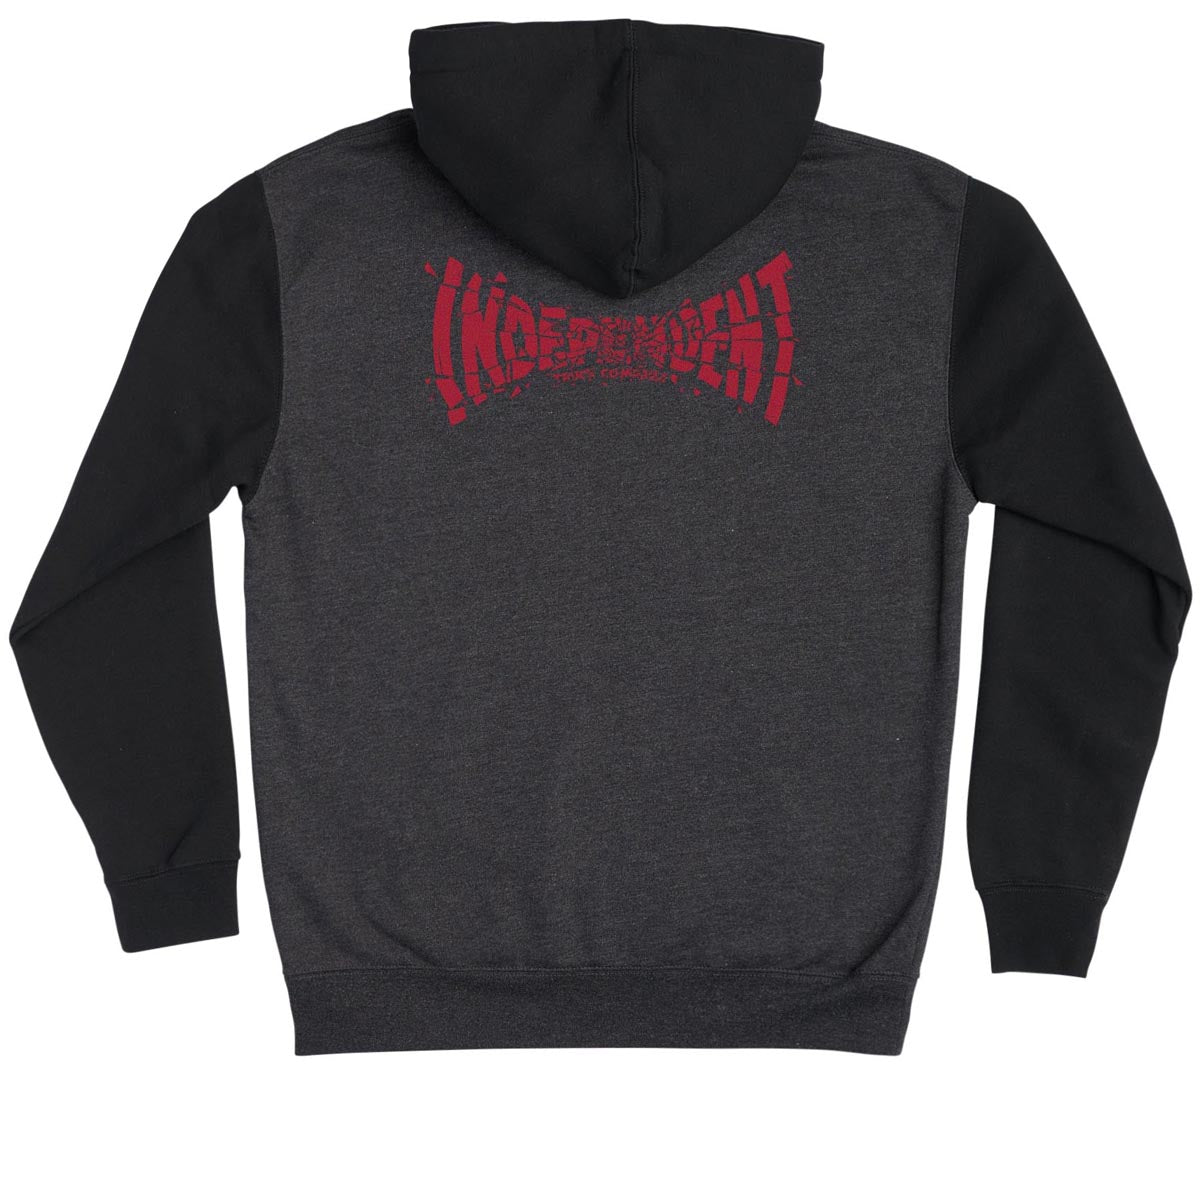 Independent Shatter Span Hoodie - Charcoal Heather/Black image 2